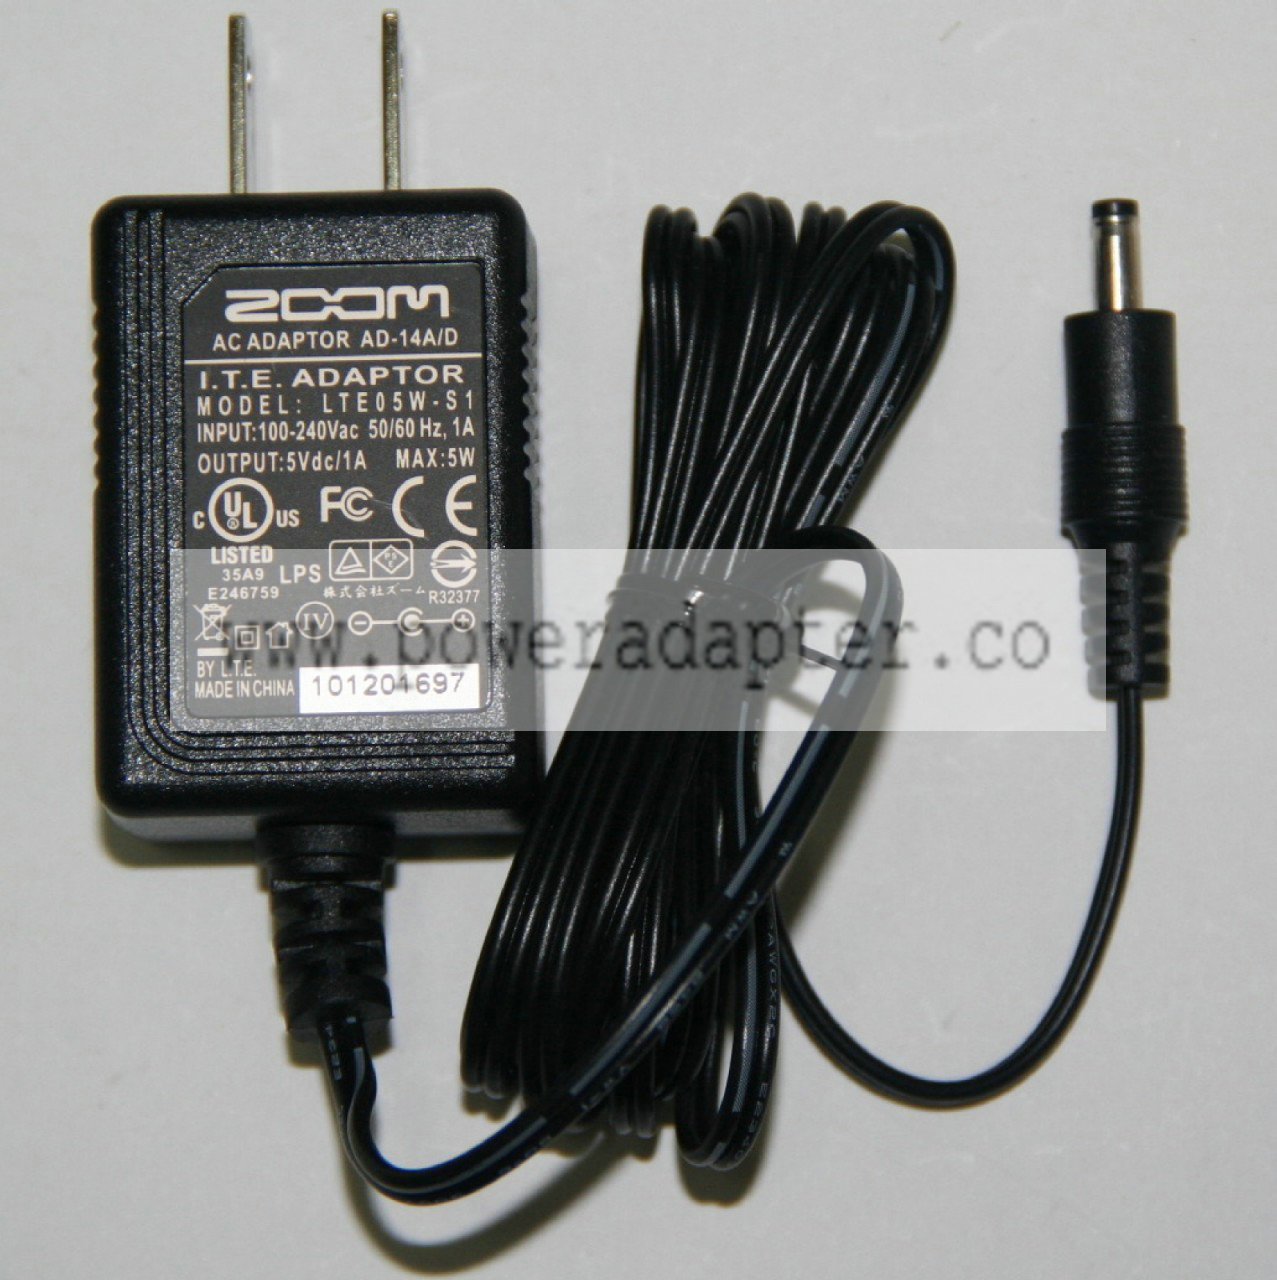 Zoom AD-114A/D 5 Volt DC power supply for H4N, G3, ZR16 Product Description Zoom AD-114A/D 5 Volt DC power supply for - Click Image to Close